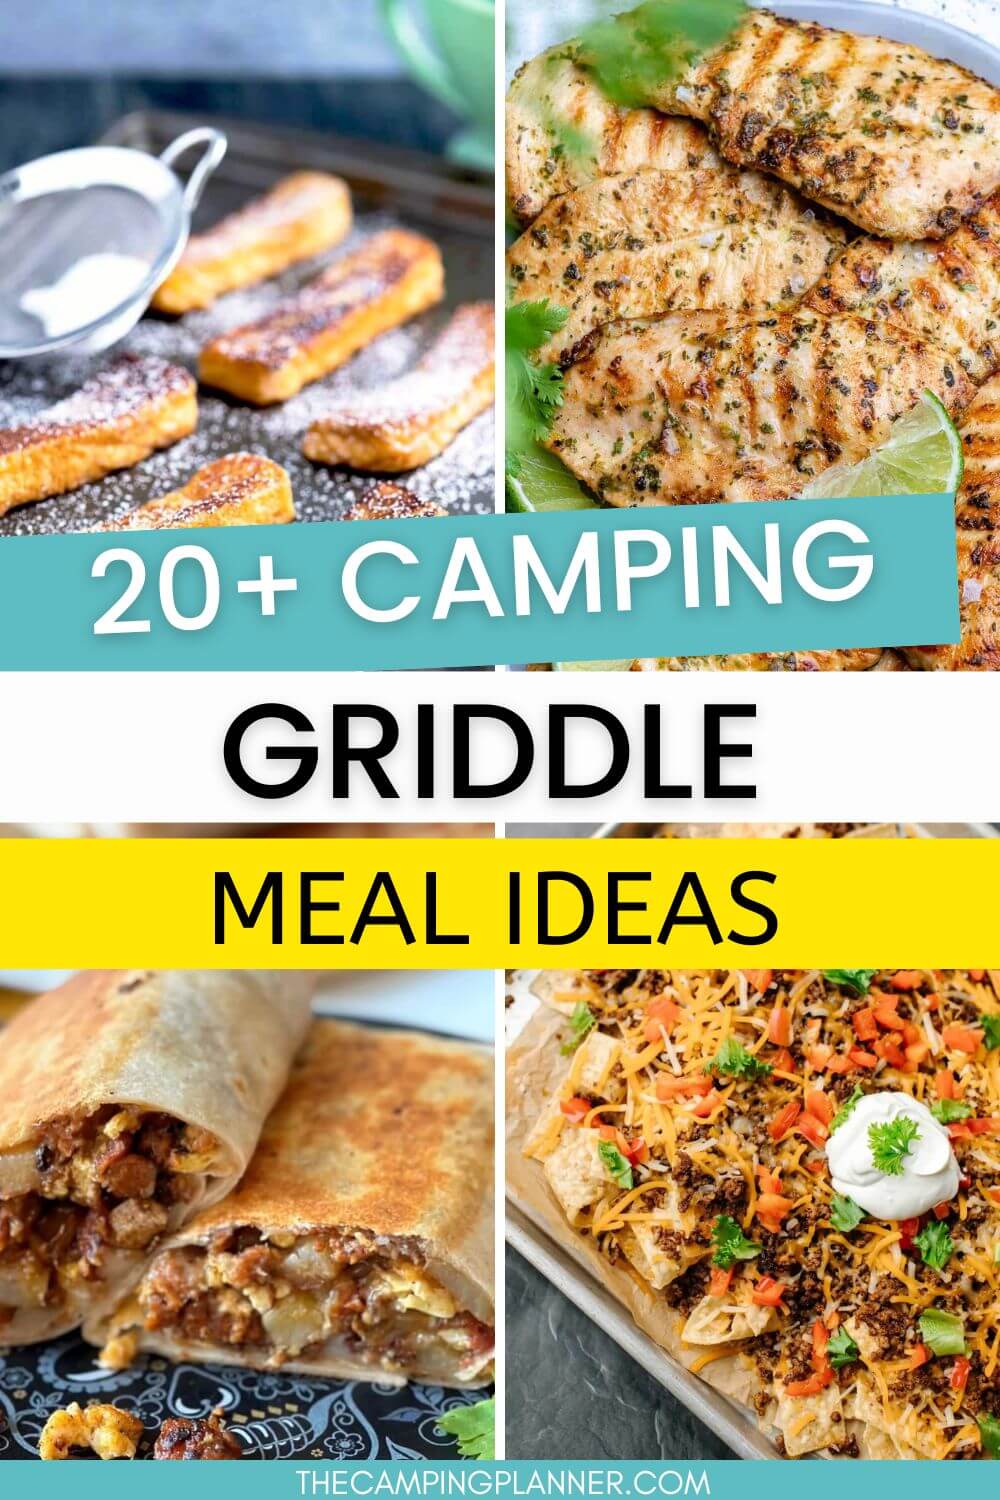 20+ camping griddle meal ideas.